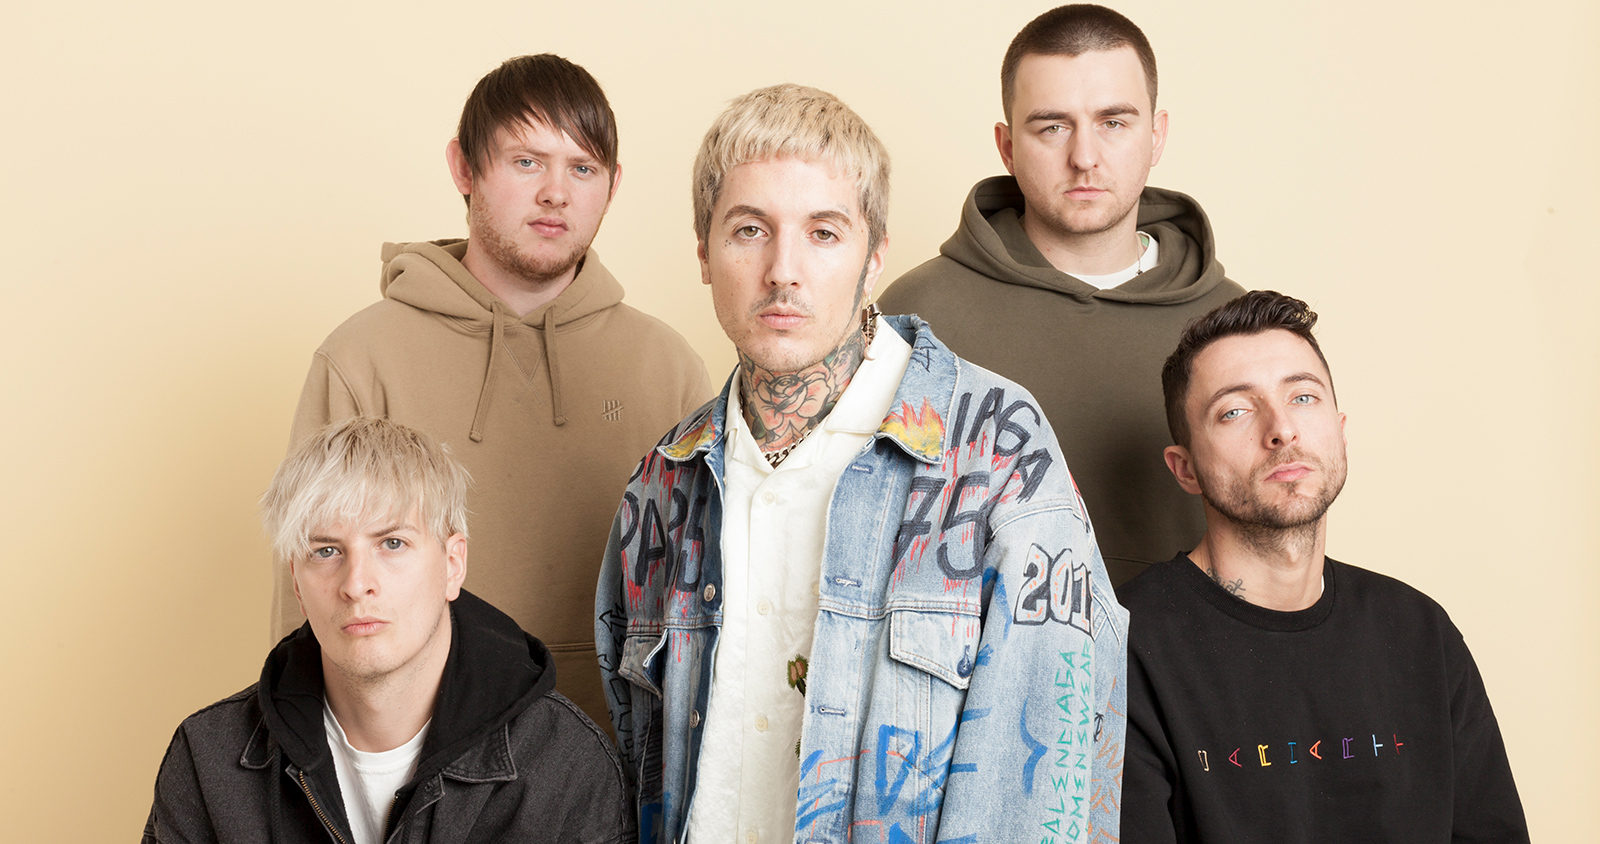 BRING ME THE HORIZON ANNOUNCE ‘THE SECOND BASE’ US SPRING TOUR